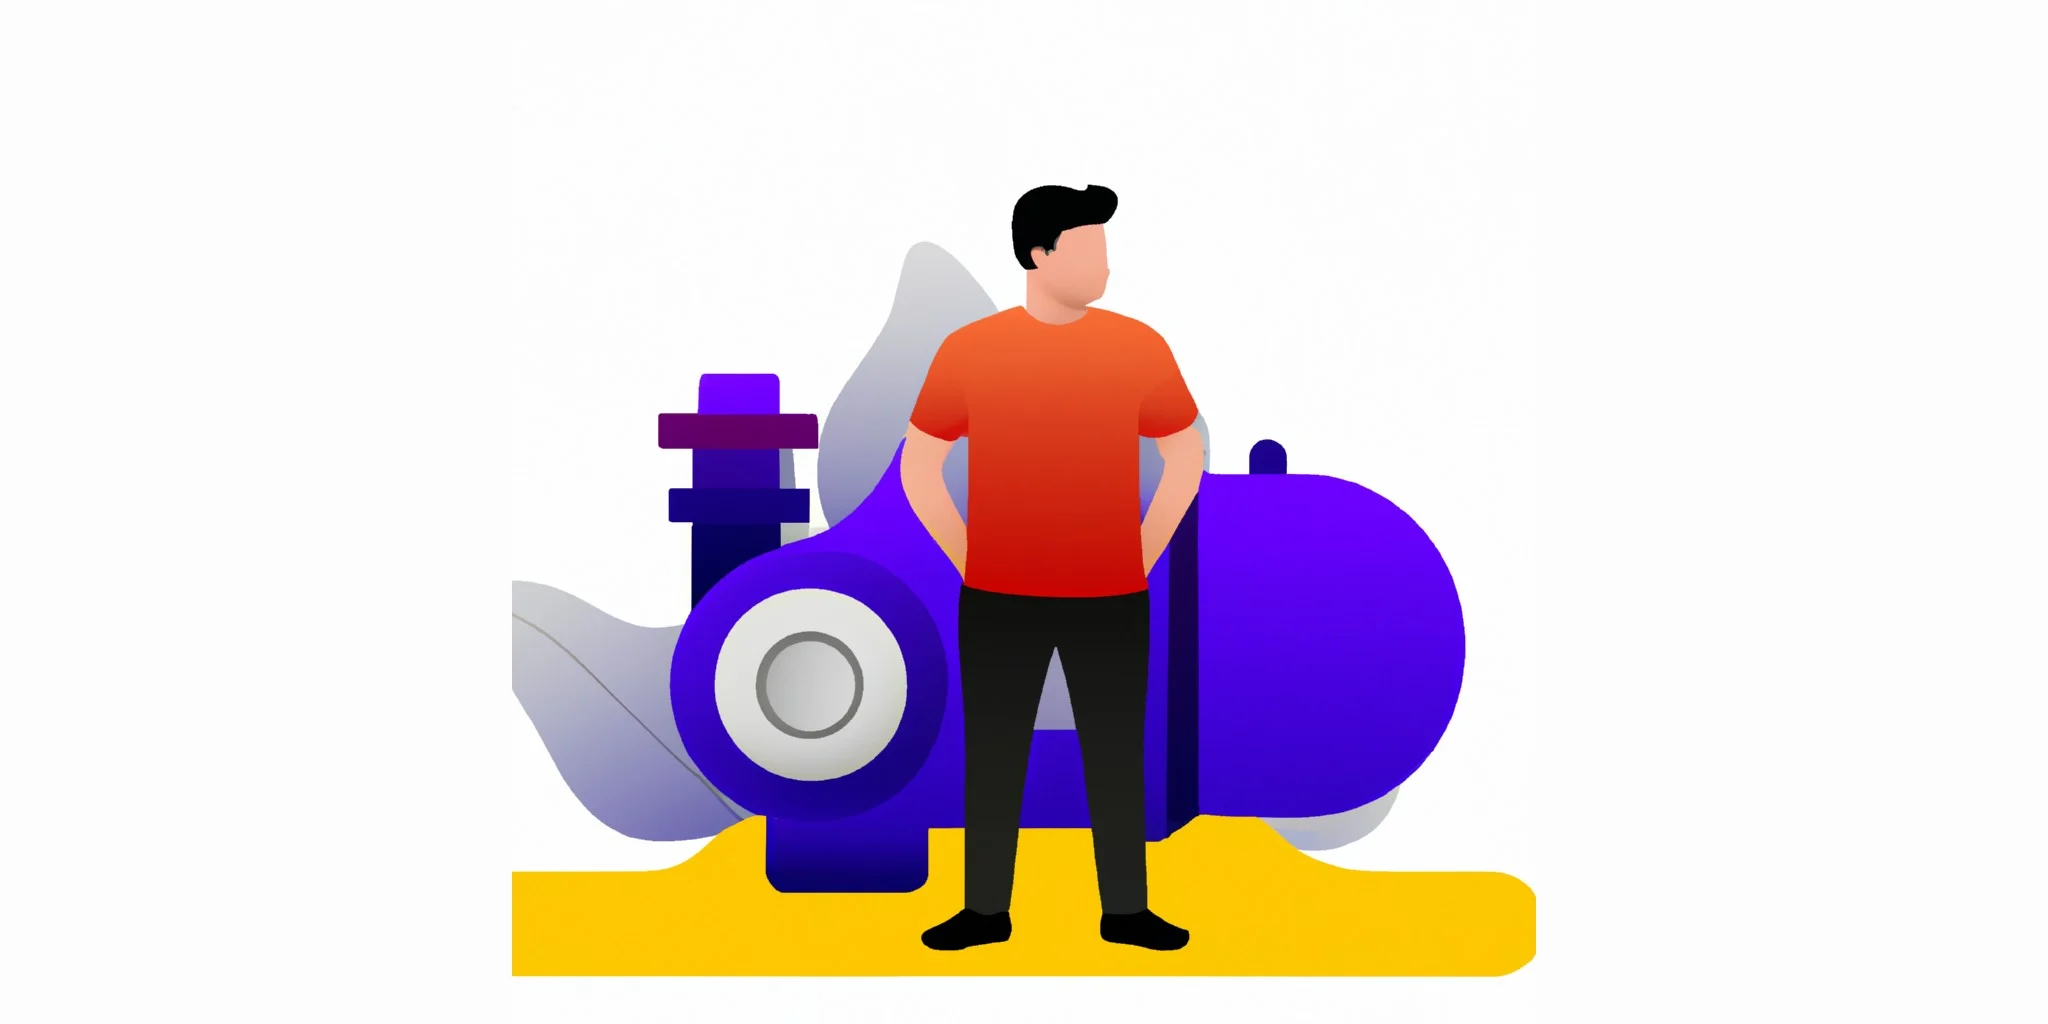 a-engine-with-a-person-in-front-in-flat-illustration-style-with-gradients-and-white-background_compressed-22d9497a-ba0e-41d0-a5c0-df03784fb676.webp